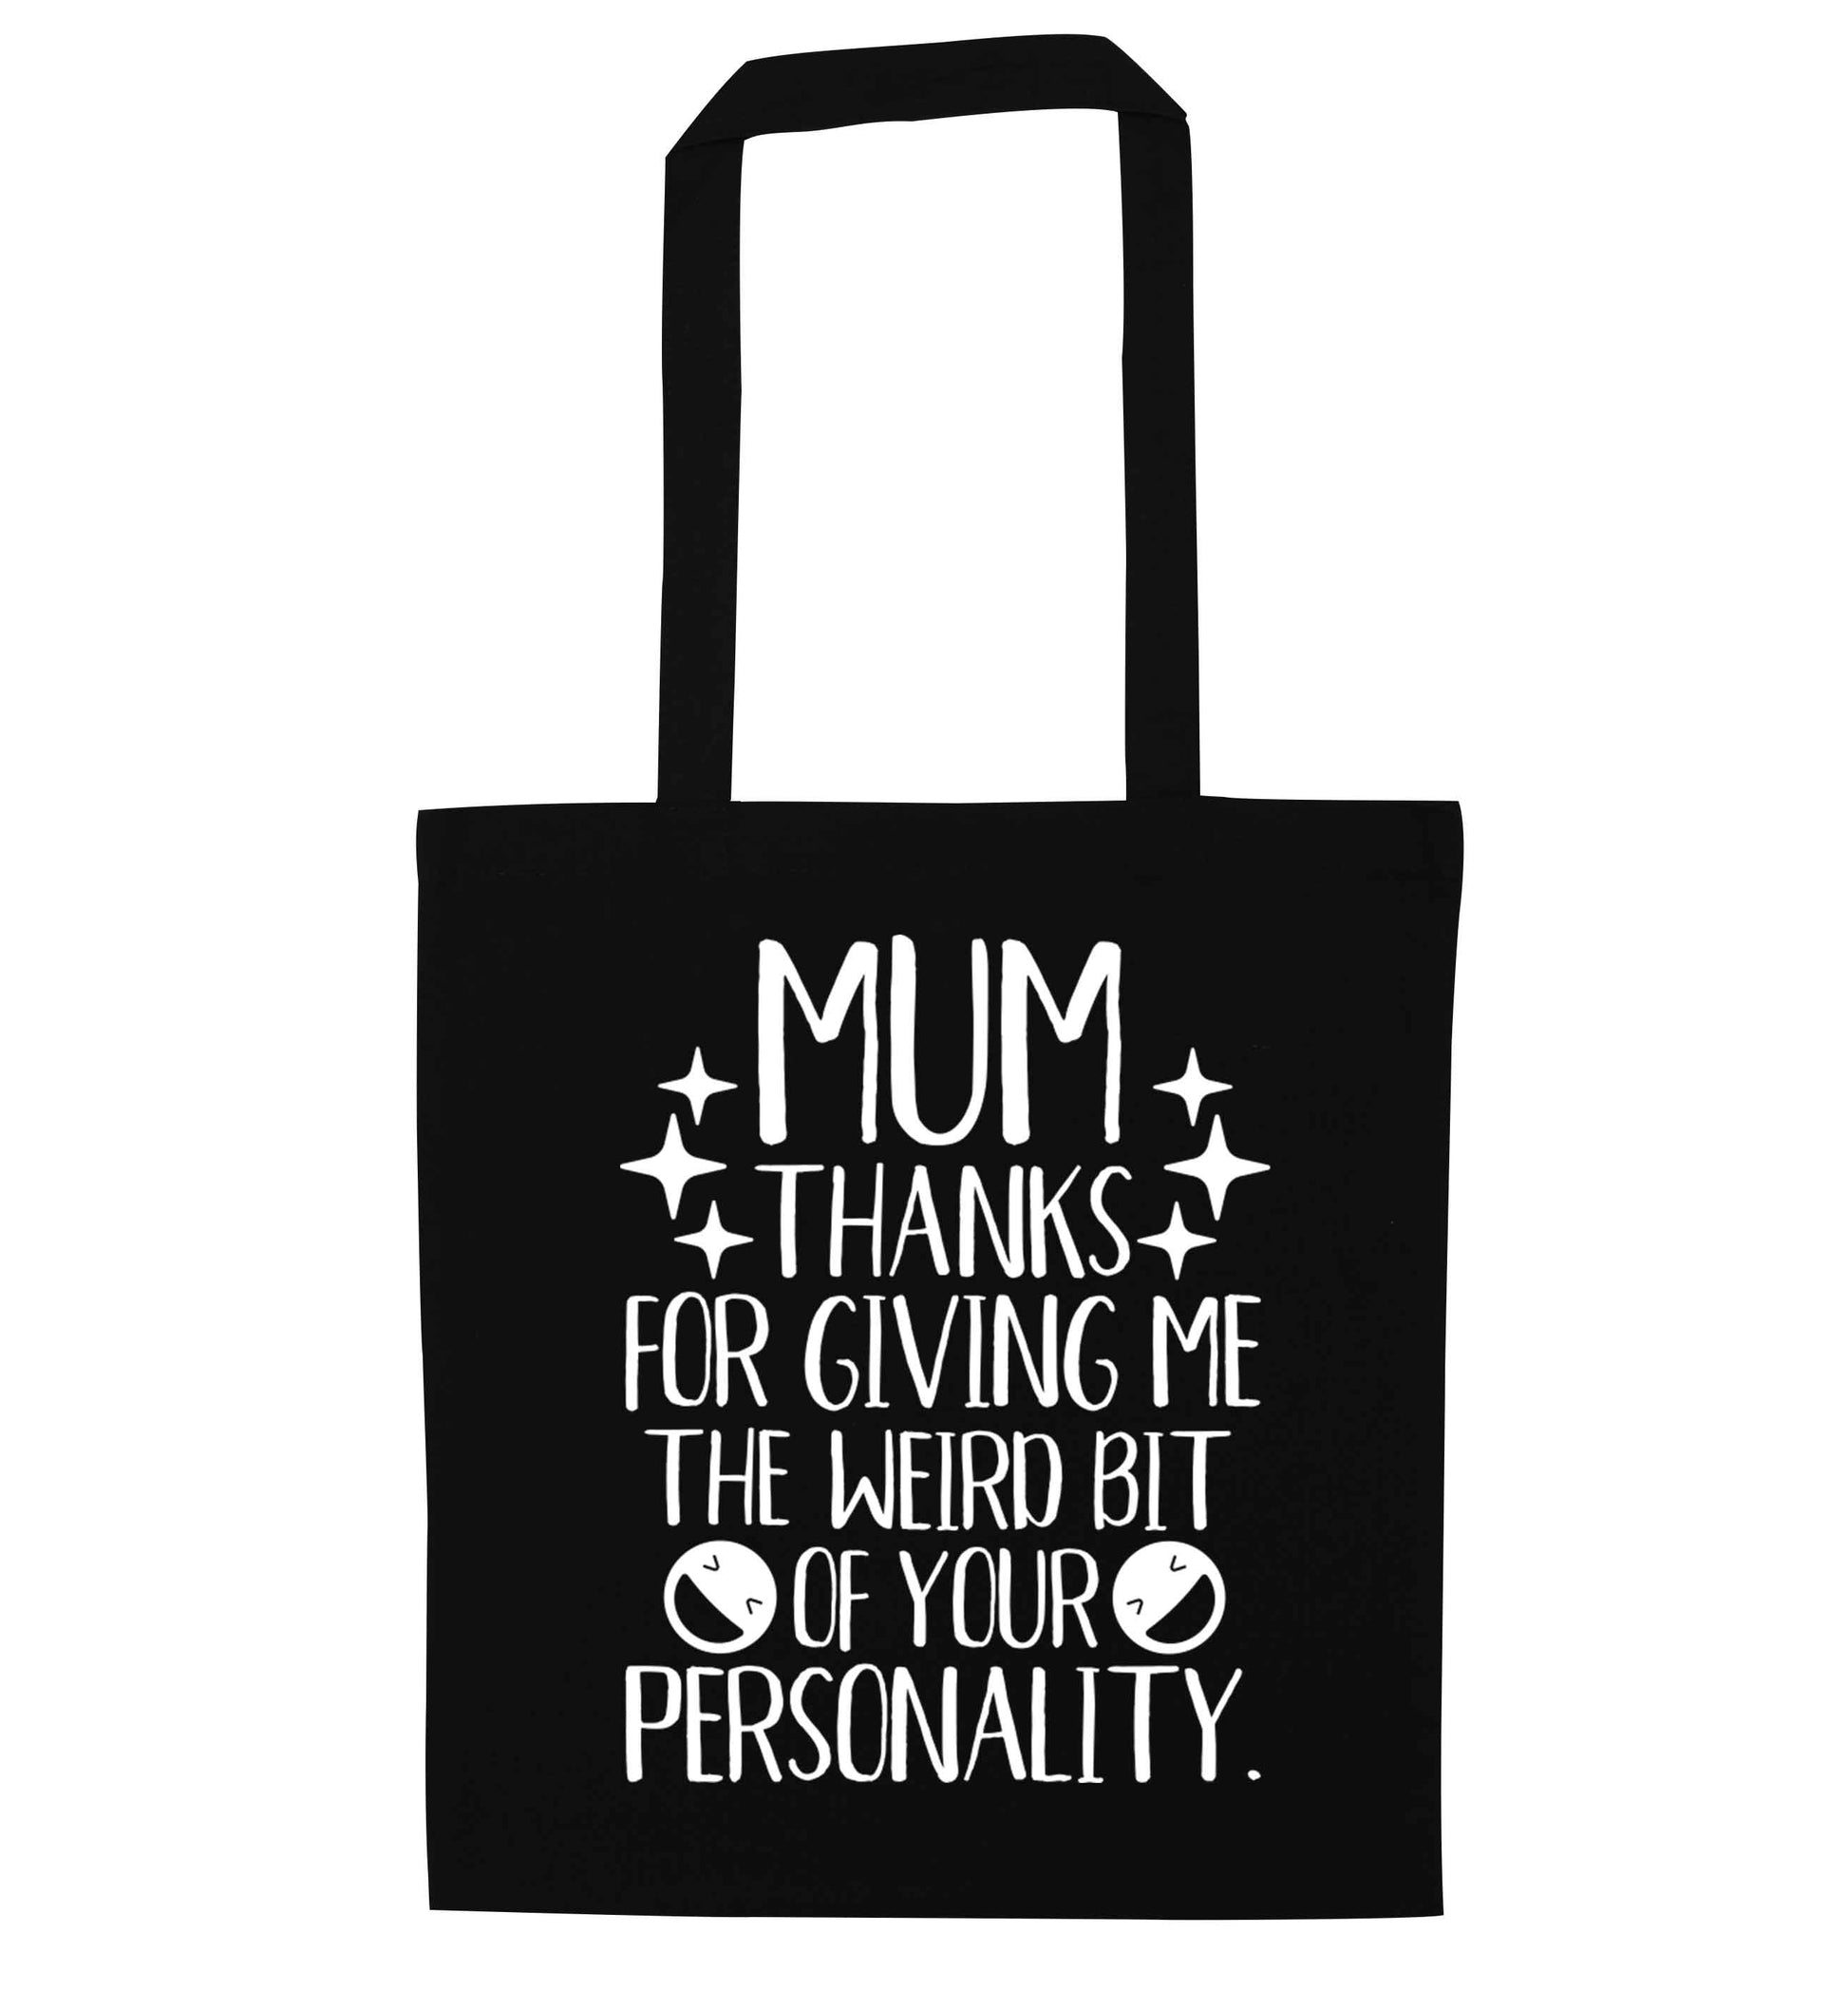 Mum thanks for giving me the weird bit of your personality black tote bag